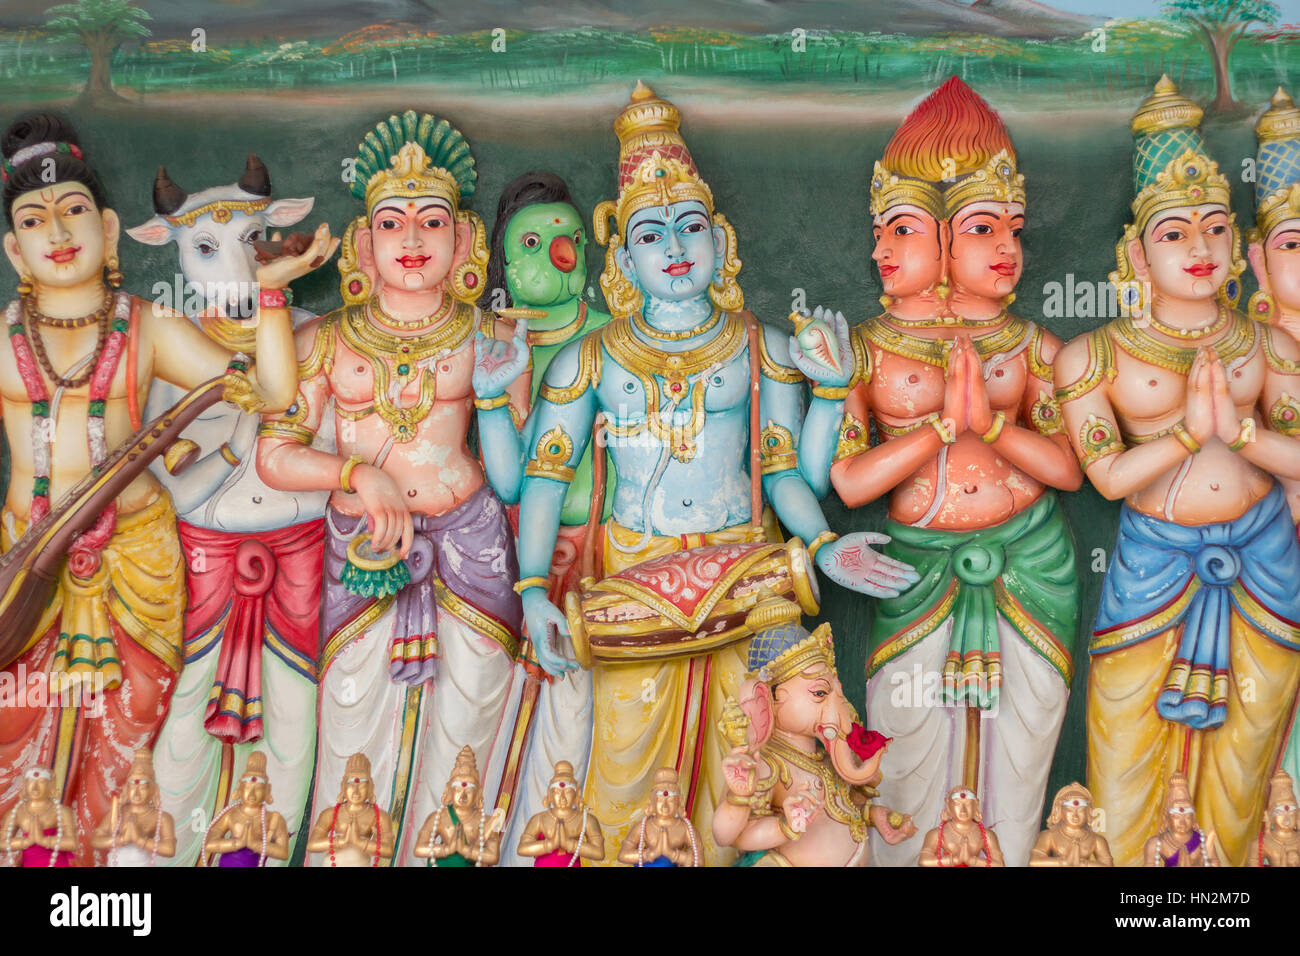 hinduism gods colorful statues Stock Photo